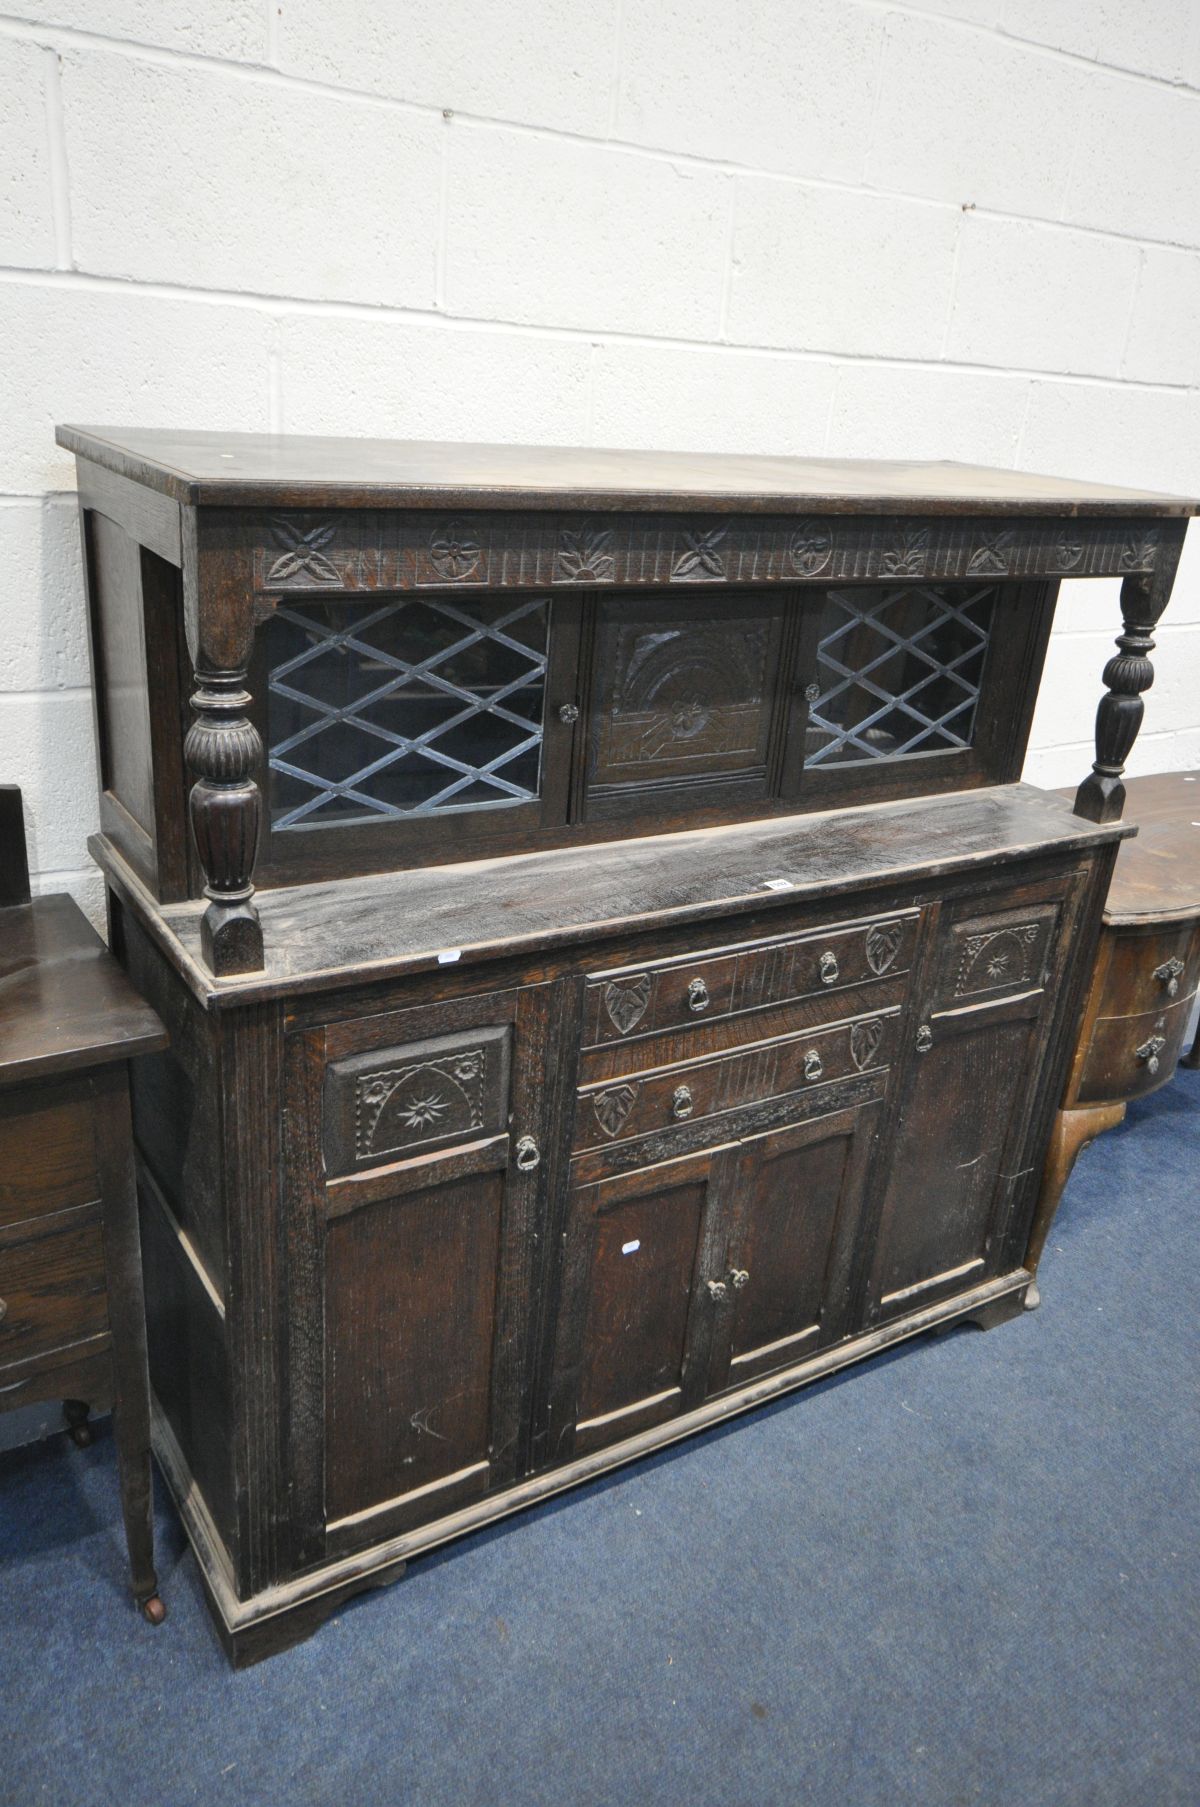 AN OAK COURT CUPBOARD, with an arrangement of cupboard doors and drawers, width 141cm x depth 47cm x - Image 2 of 4